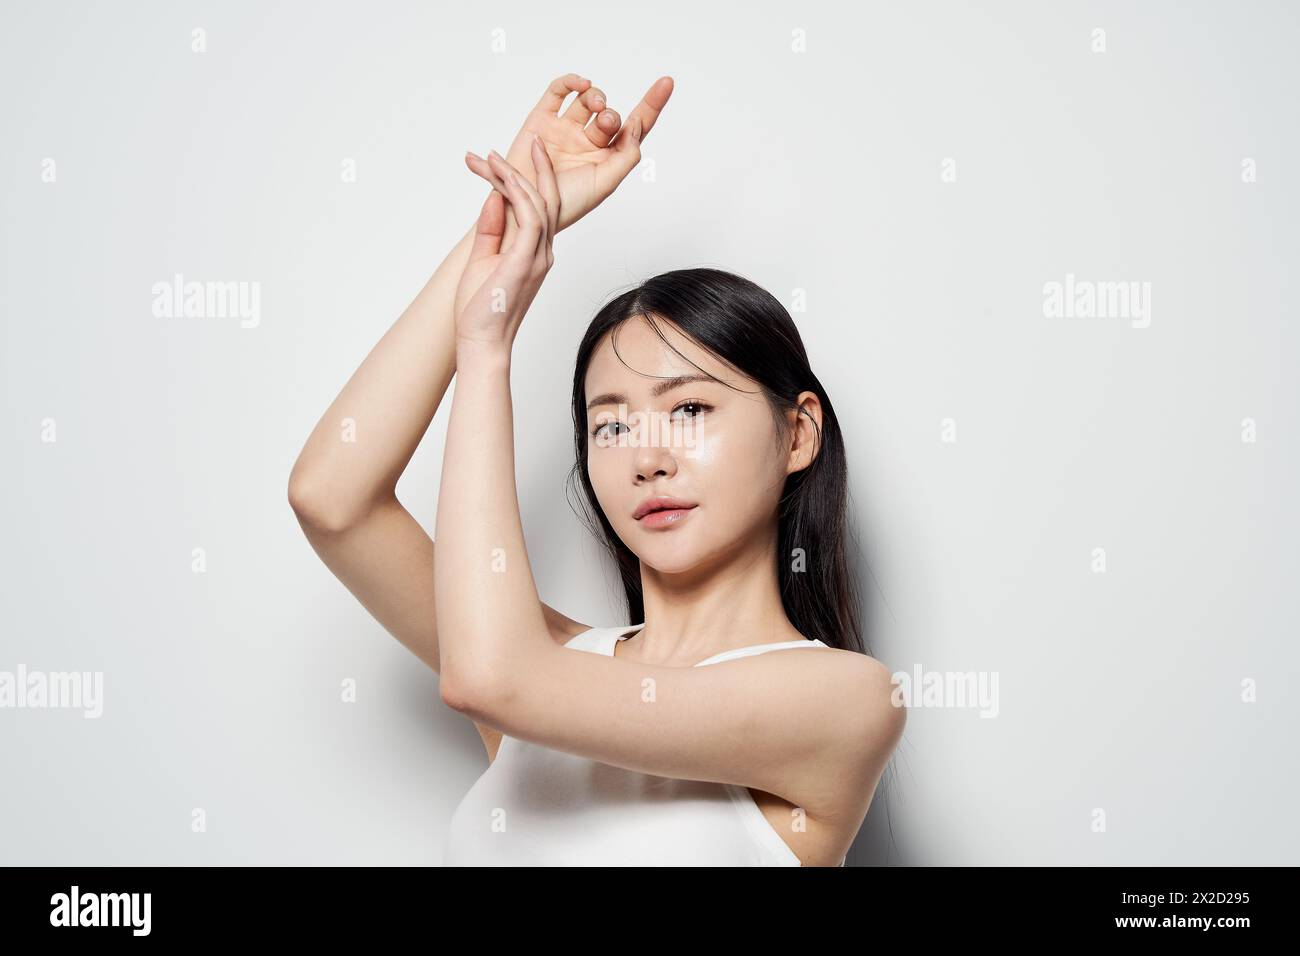 Asian Woman Poses in White Top Against White Background Stock Photo